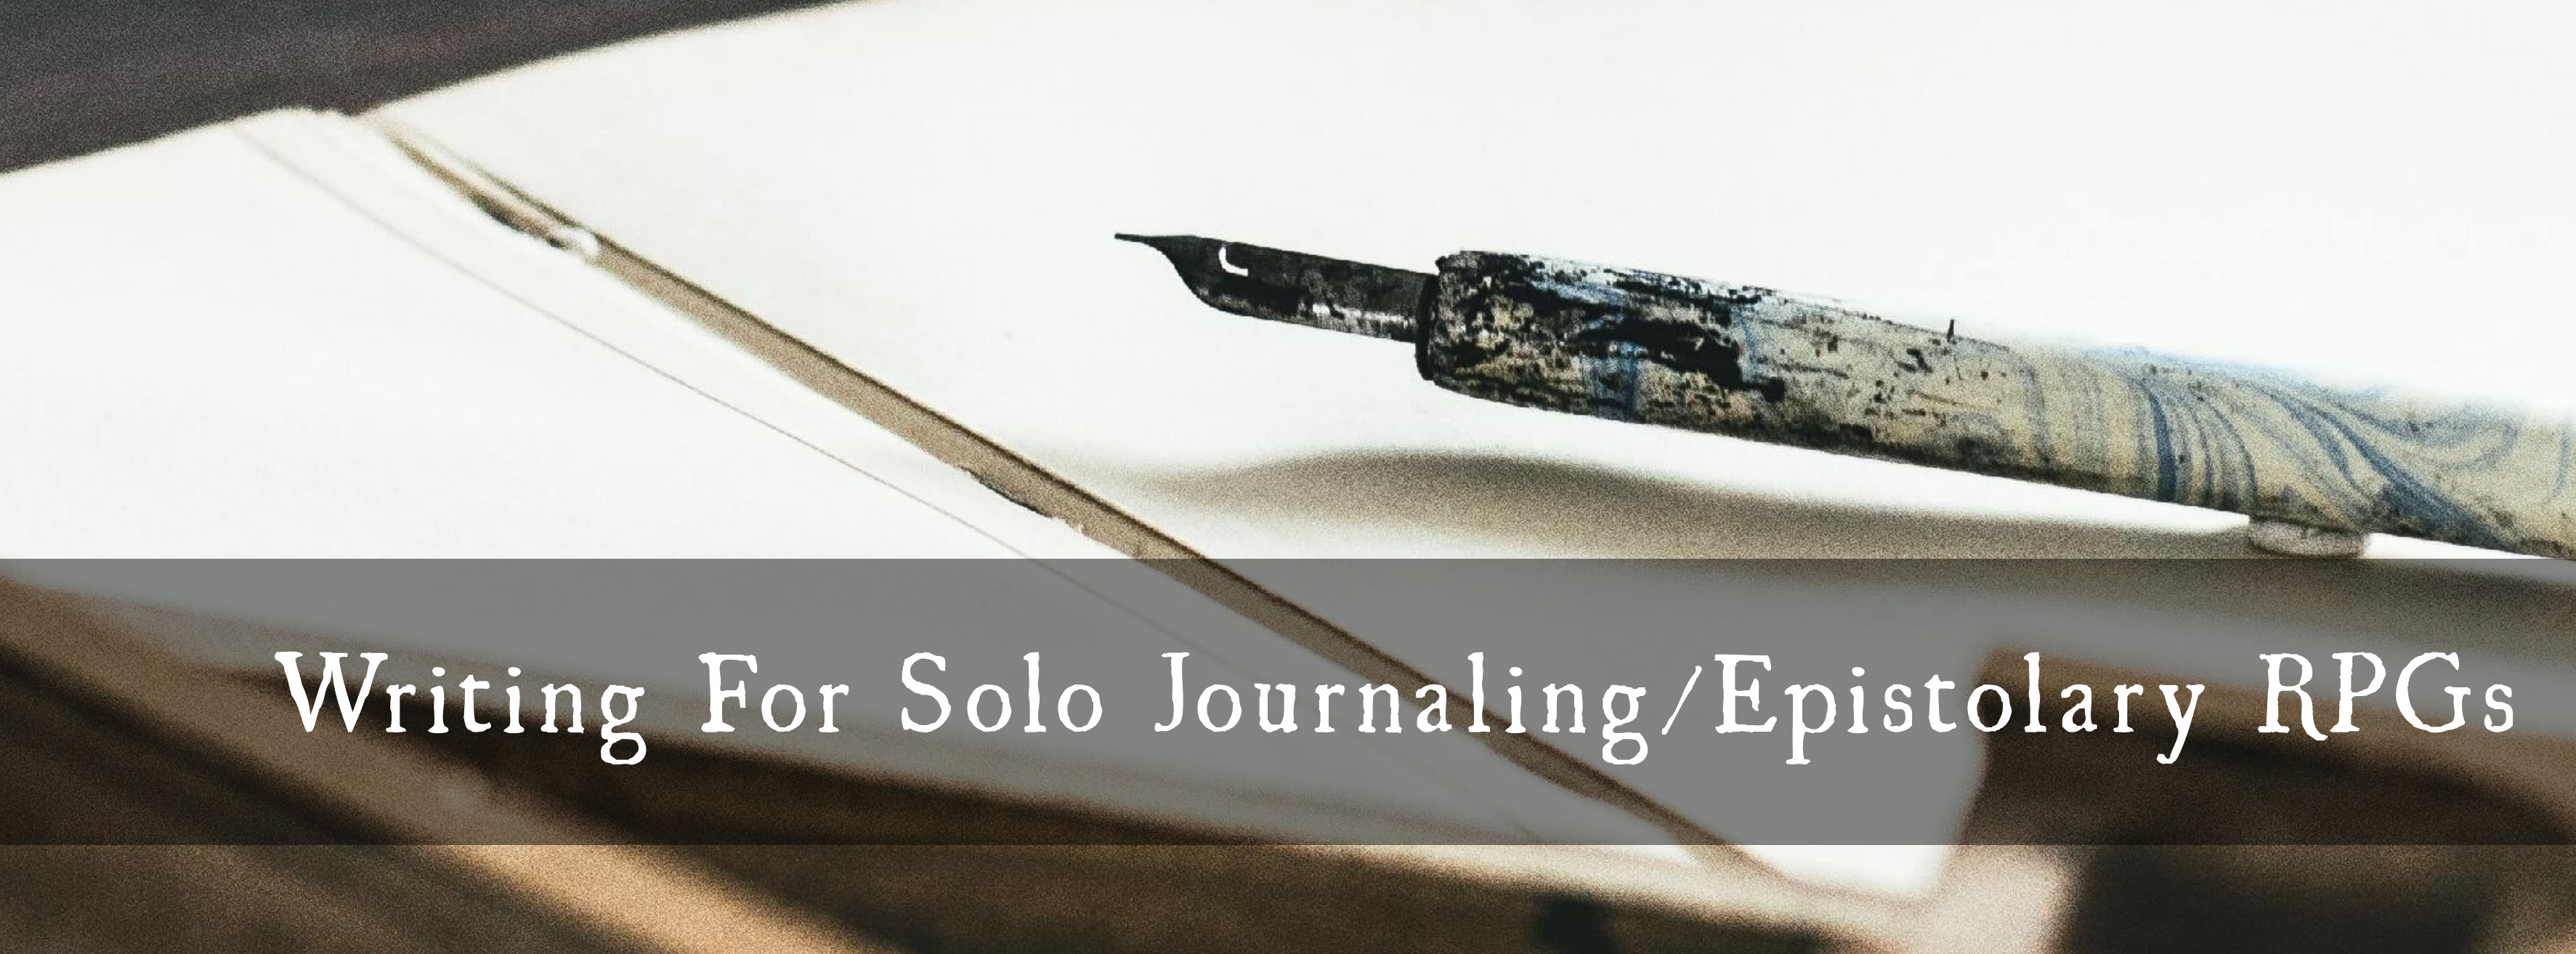 Writing For Solo Journaling & Epistolary RPGs